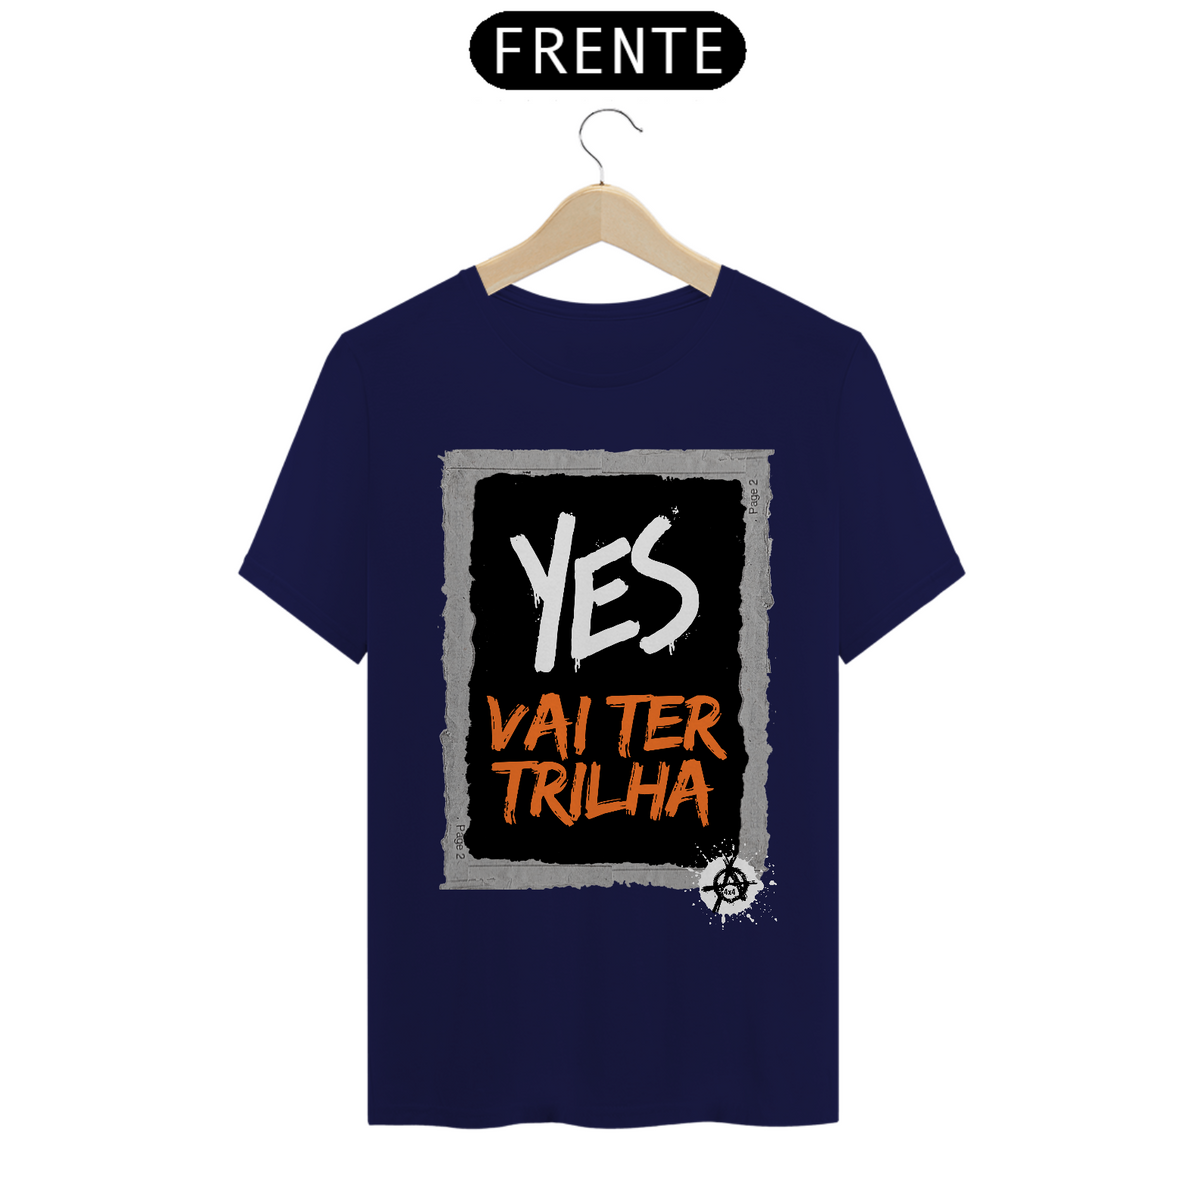 Nome do produto: T-Shirt Classic 55Cents - Yes